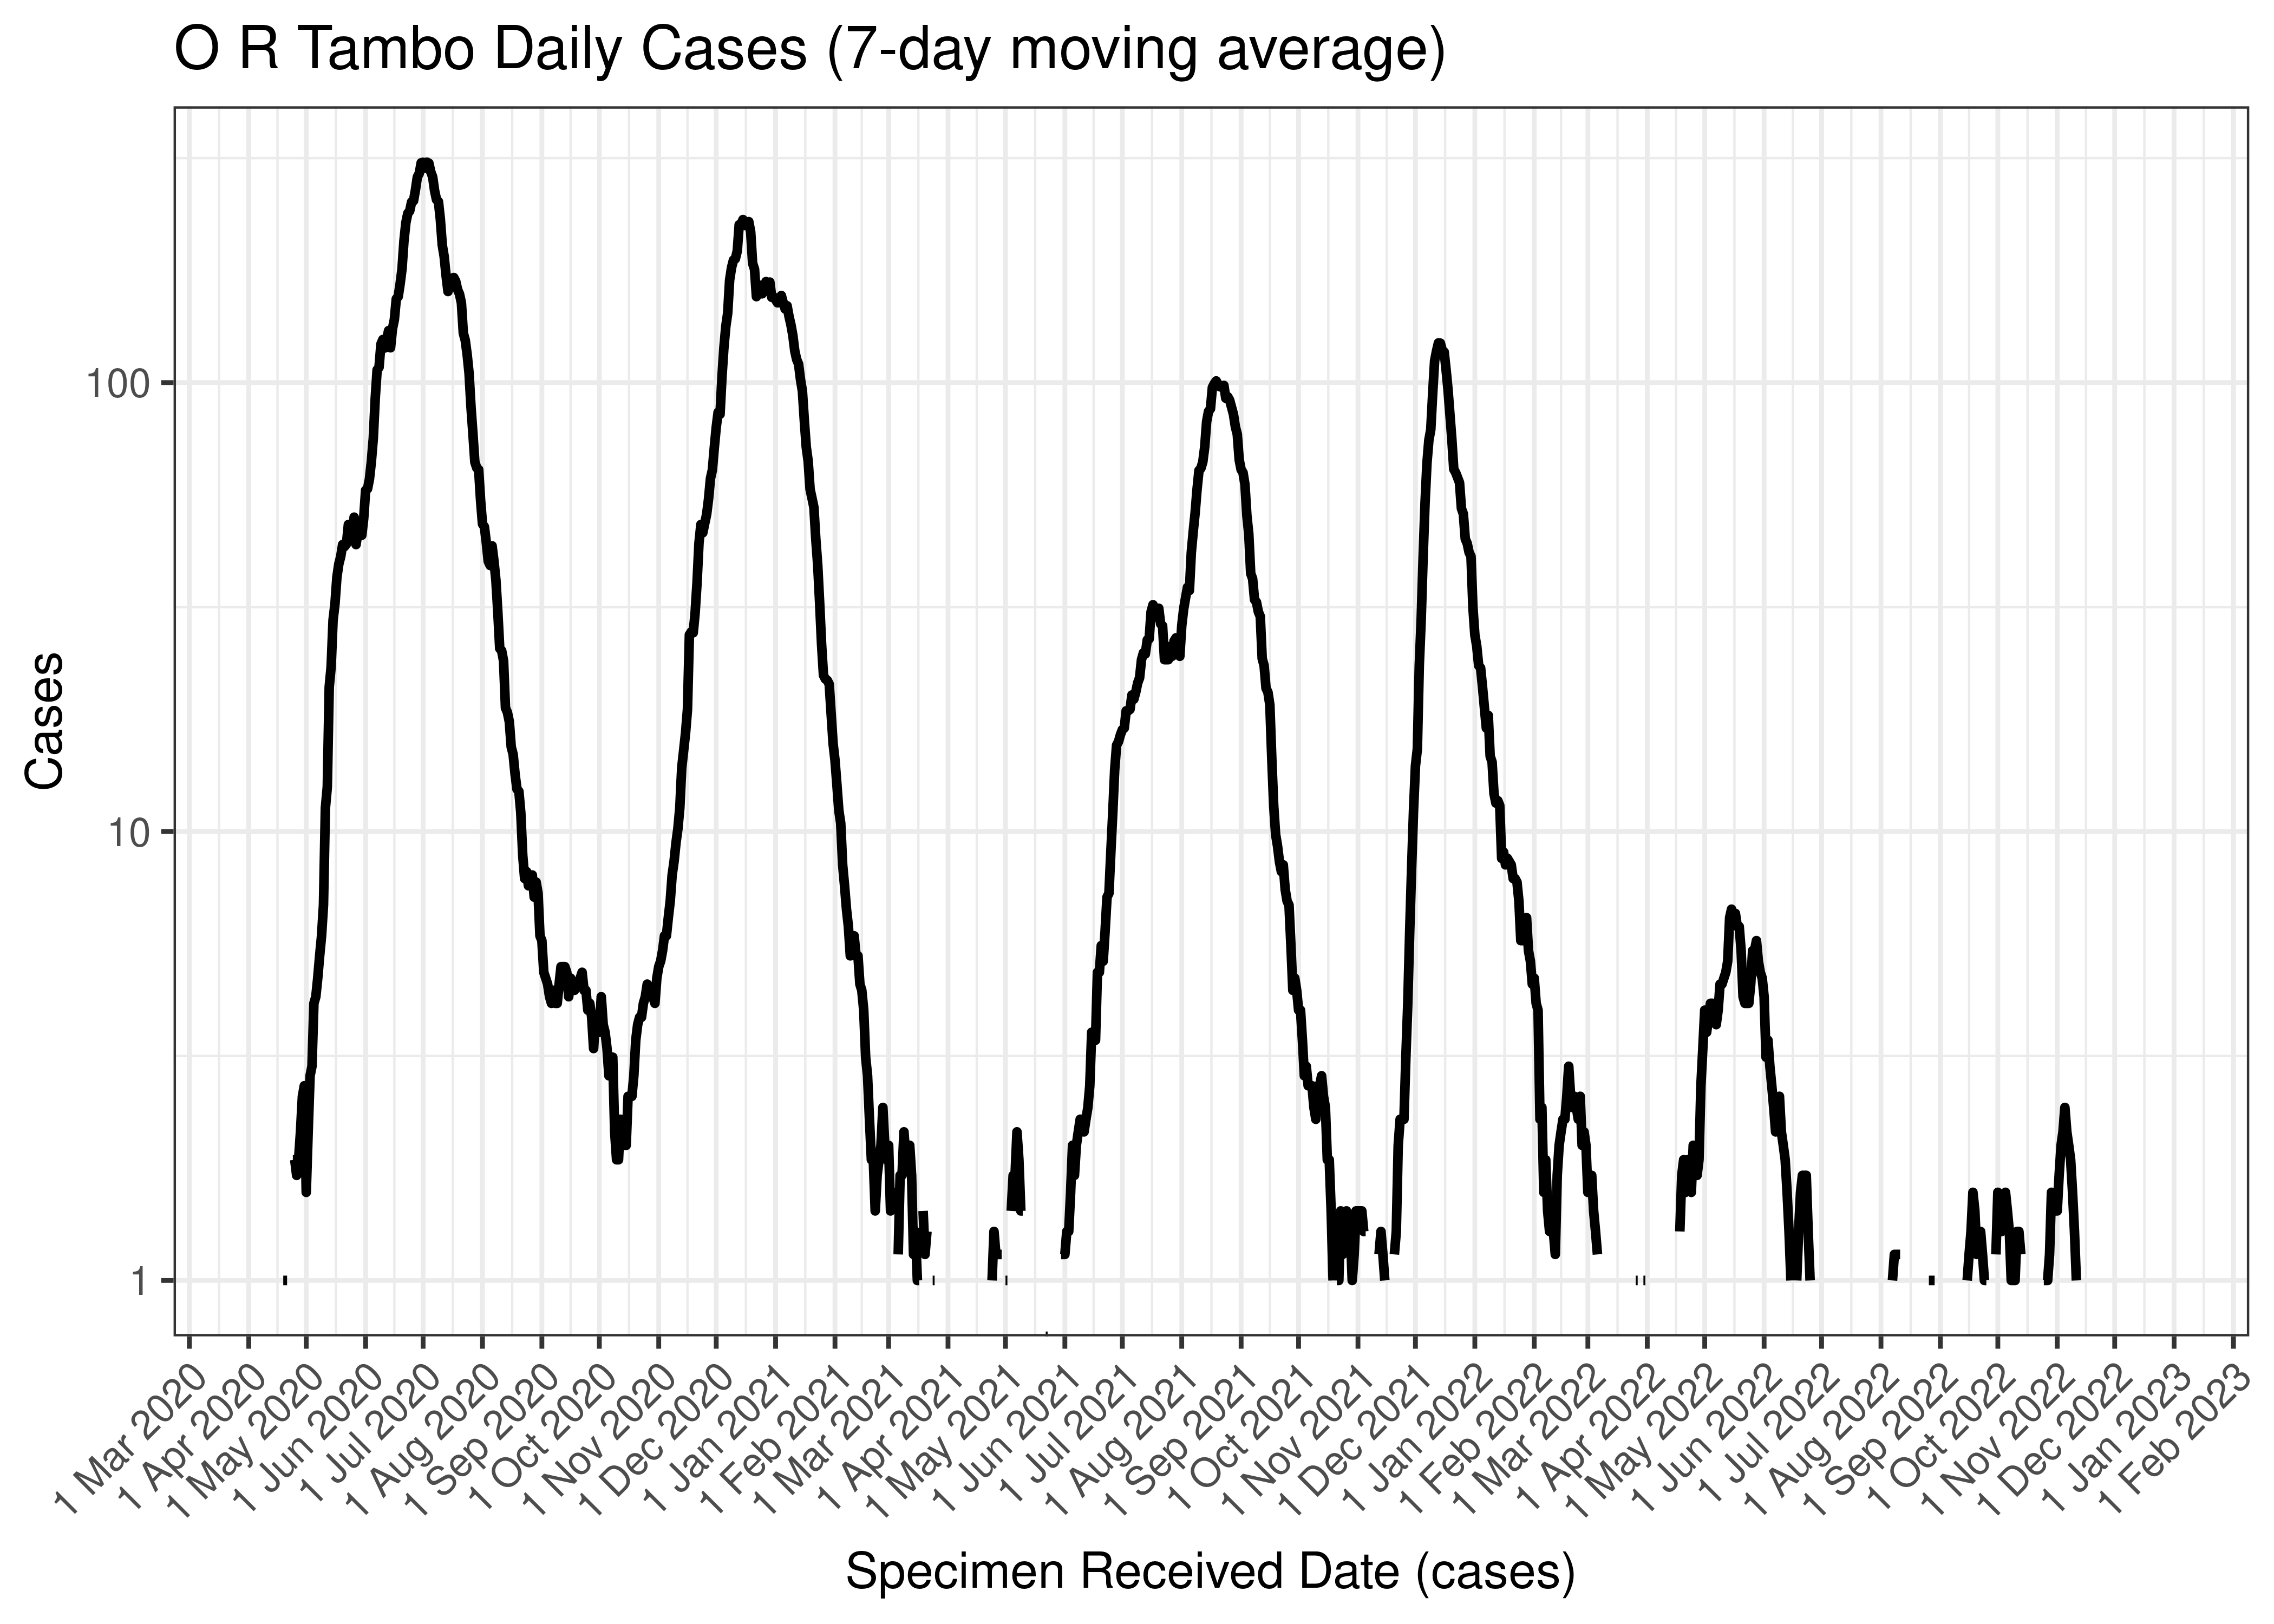 O R Tambo Daily Cases (7-day moving average)